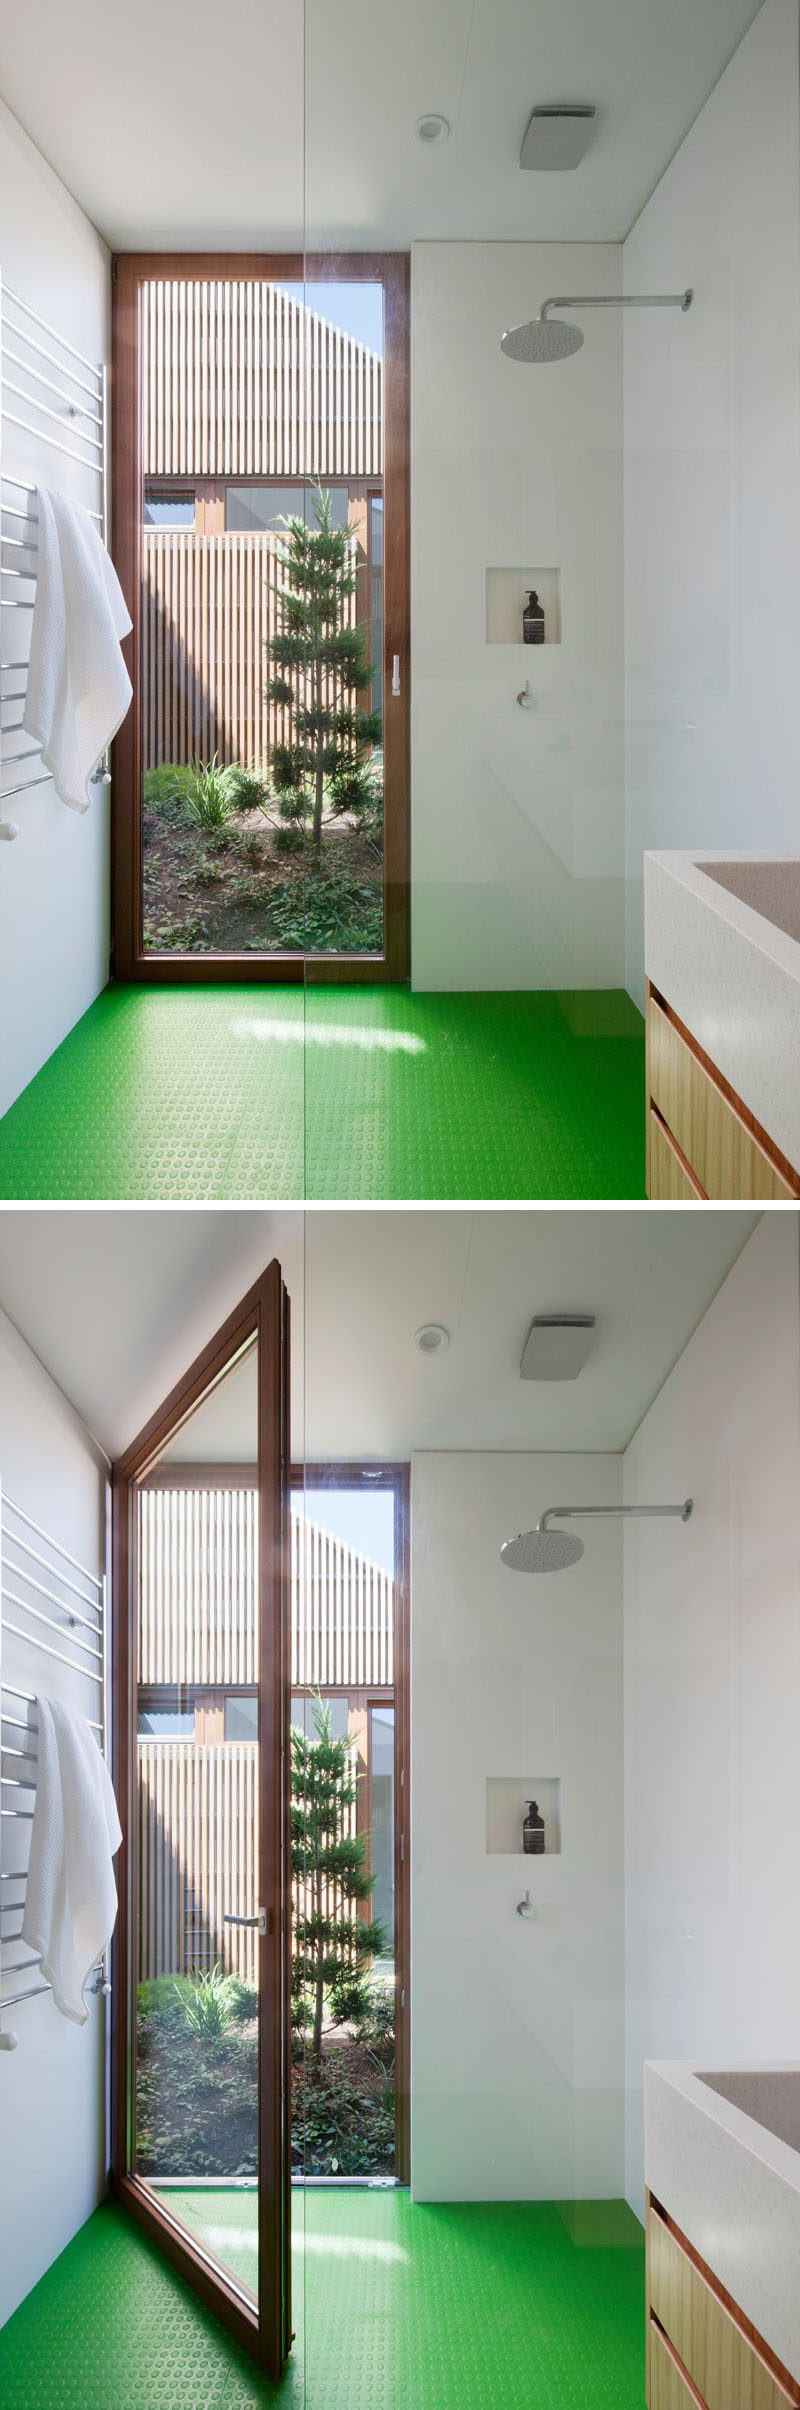 In this modern bathroom, there's bright green flooring and built-in shelving in the shower, and a floor-to-ceiling wood framed door that opens off the shower into the courtyard just outside.